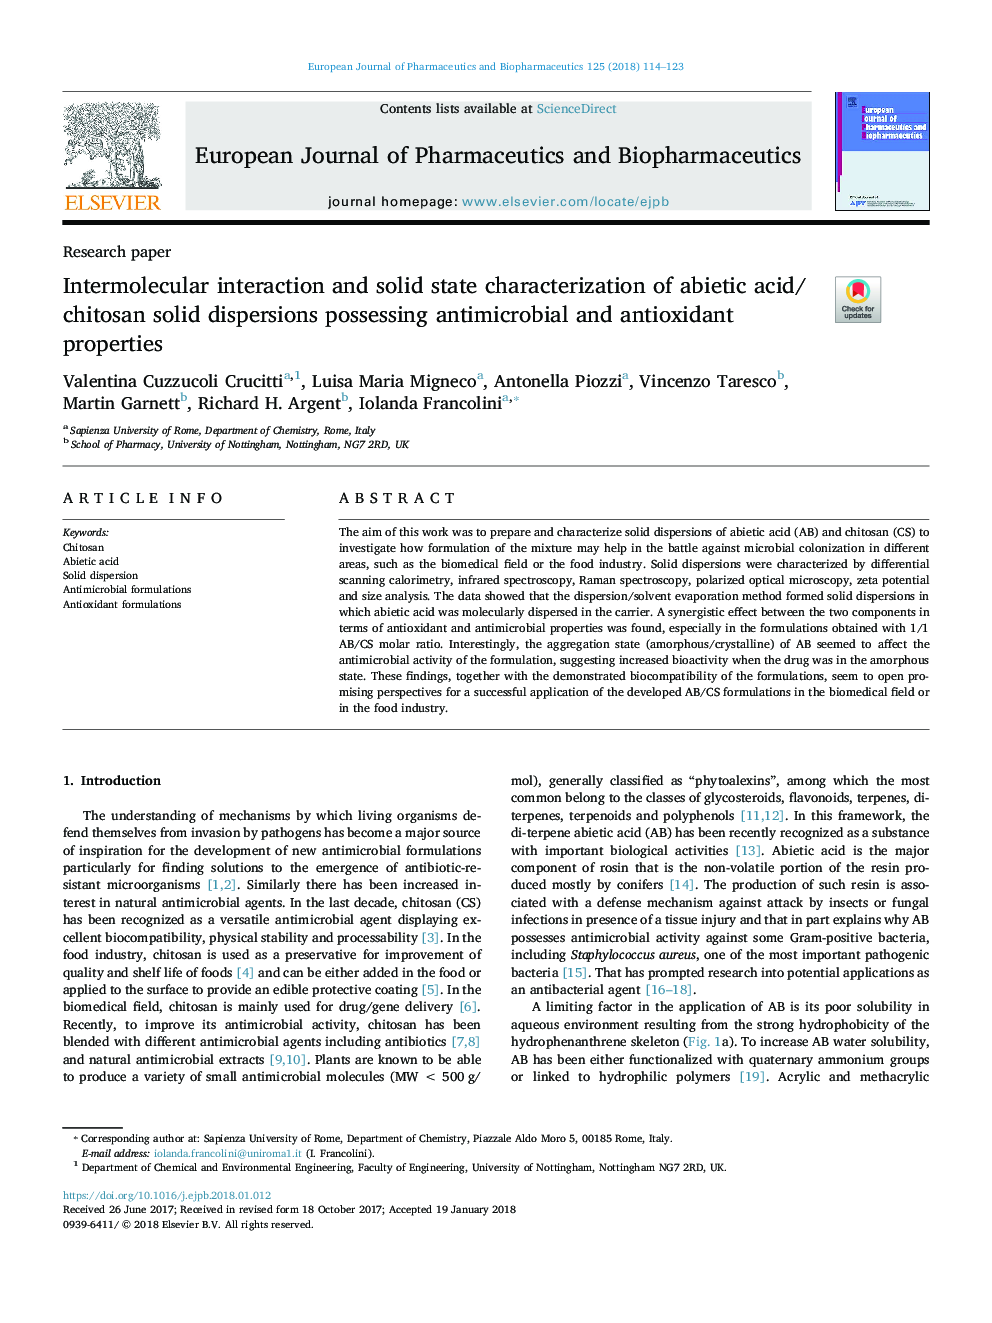 Intermolecular interaction and solid state characterization of abietic acid/chitosan solid dispersions possessing antimicrobial and antioxidant properties